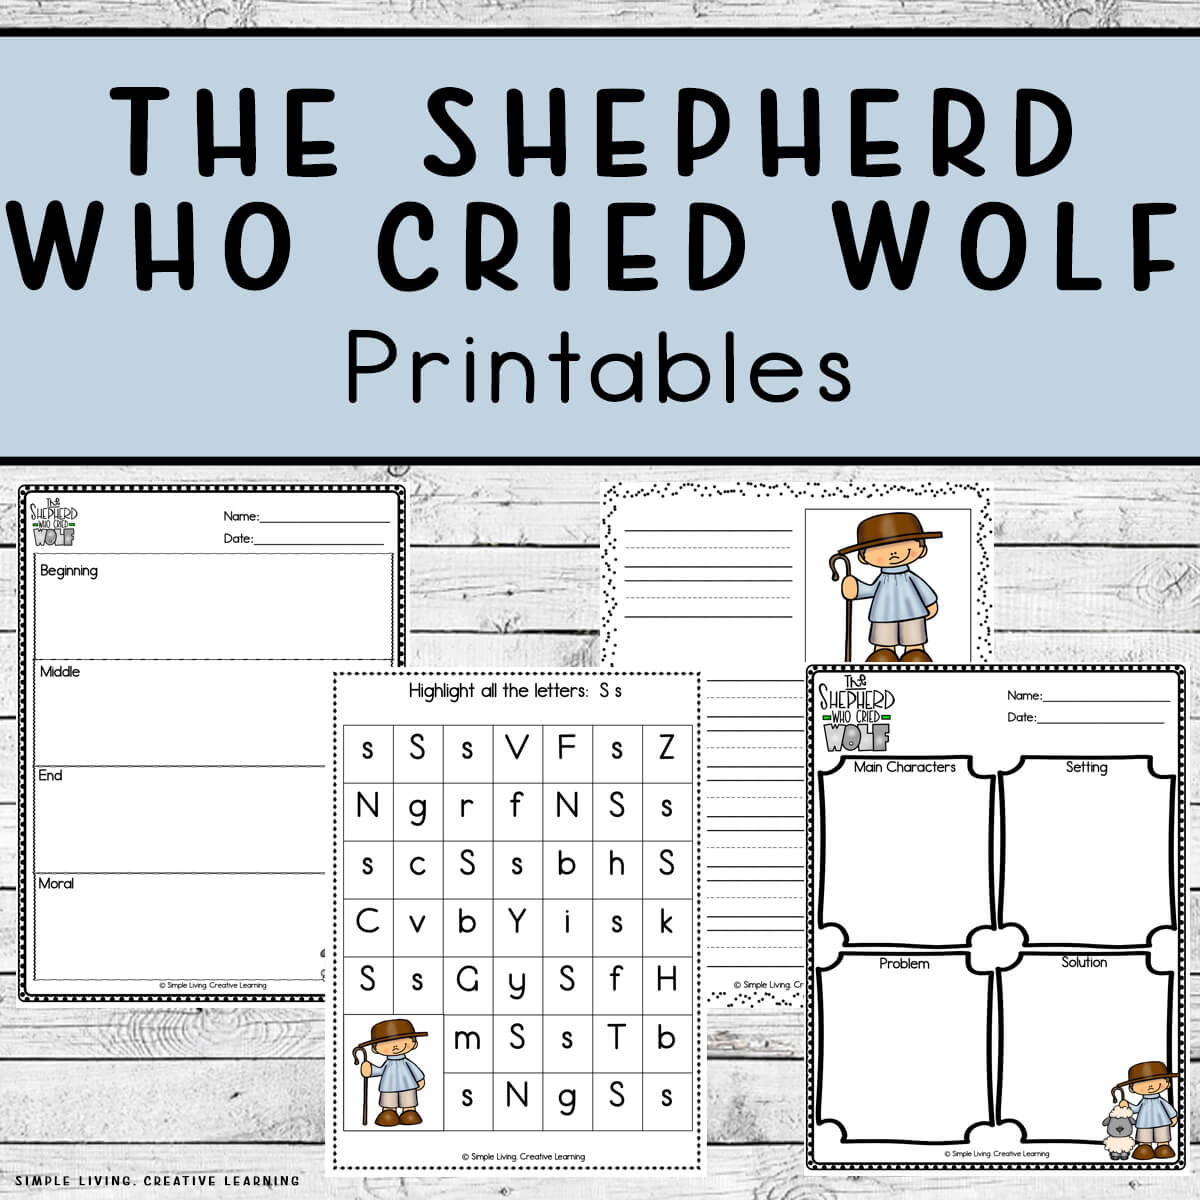 The Shepherd Who Cried Wolf Printables four pages